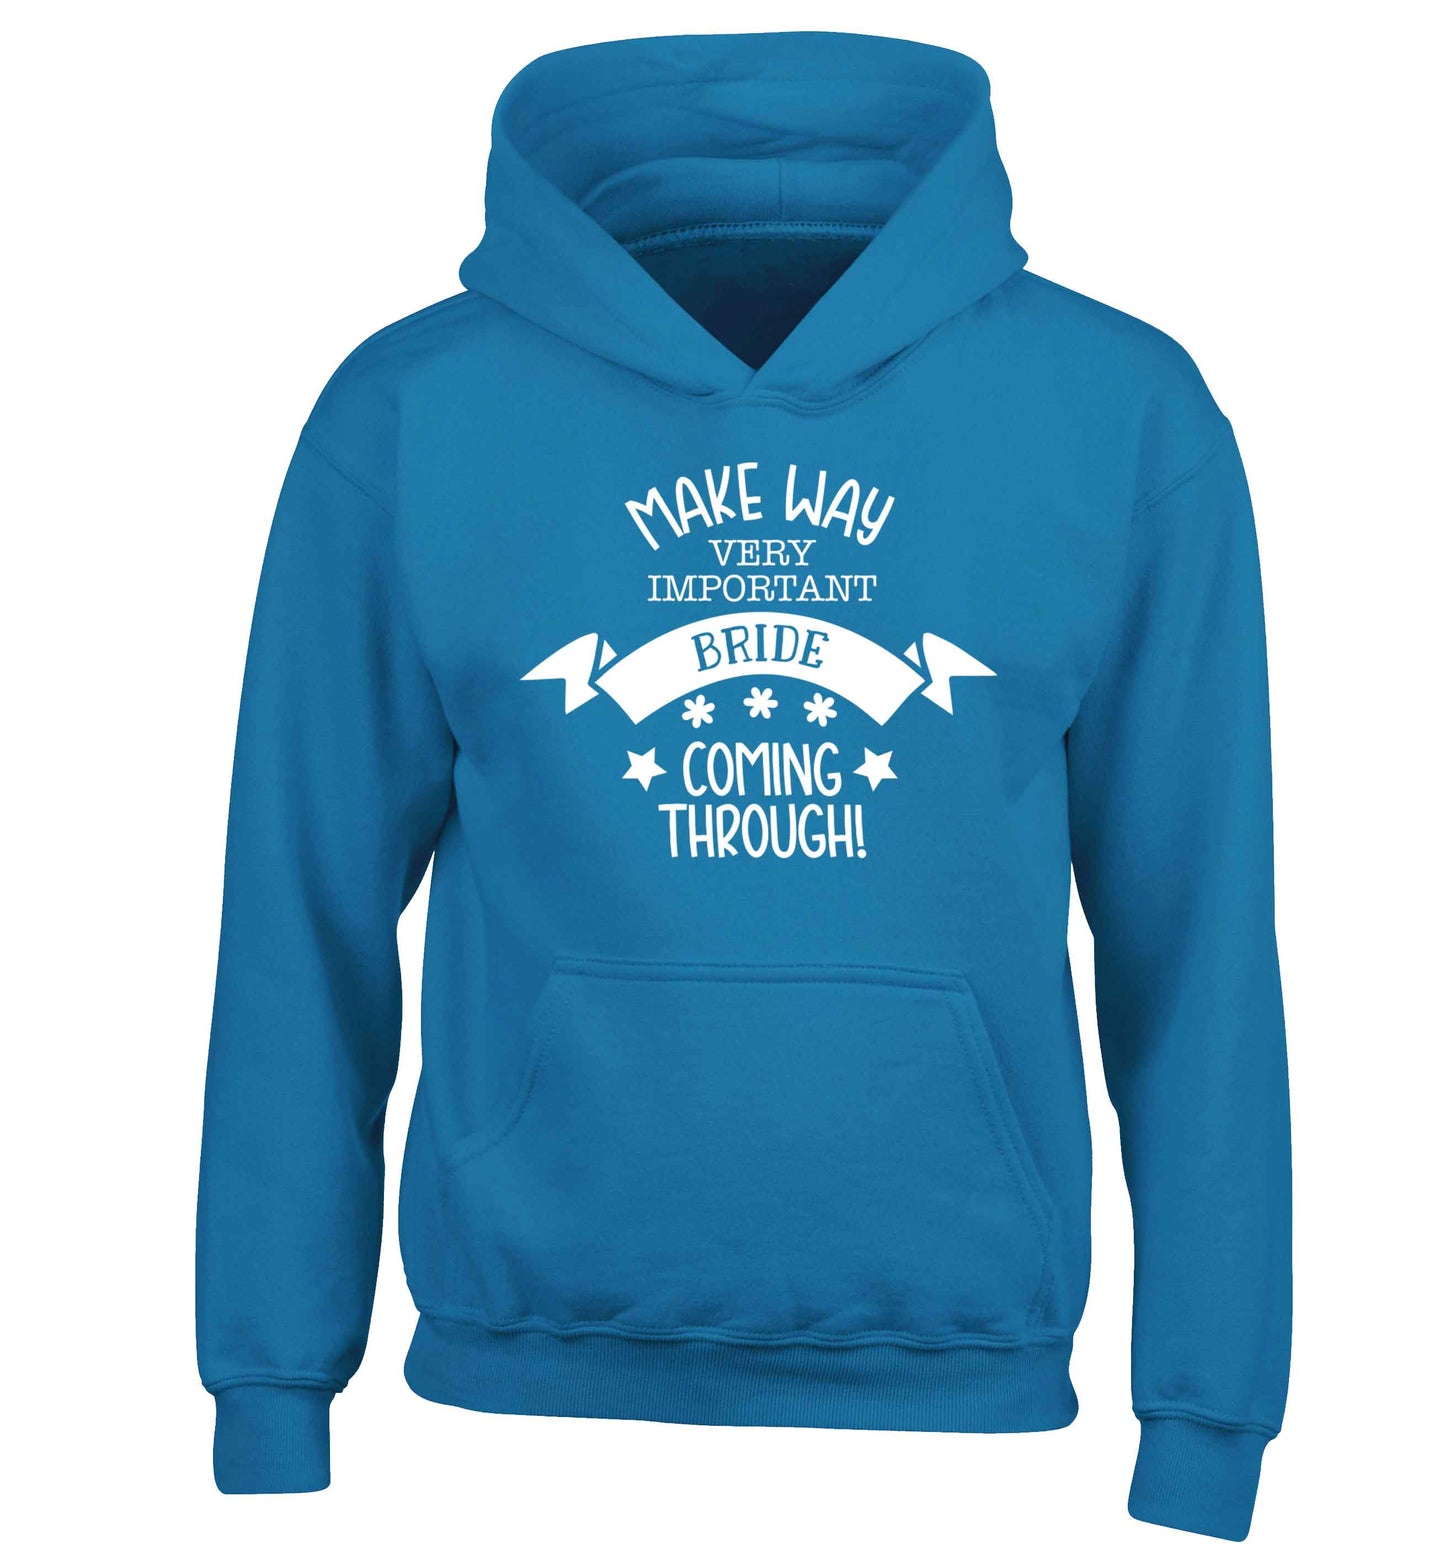 Make way V.I.P very important bride coming through! children's blue hoodie 12-13 Years